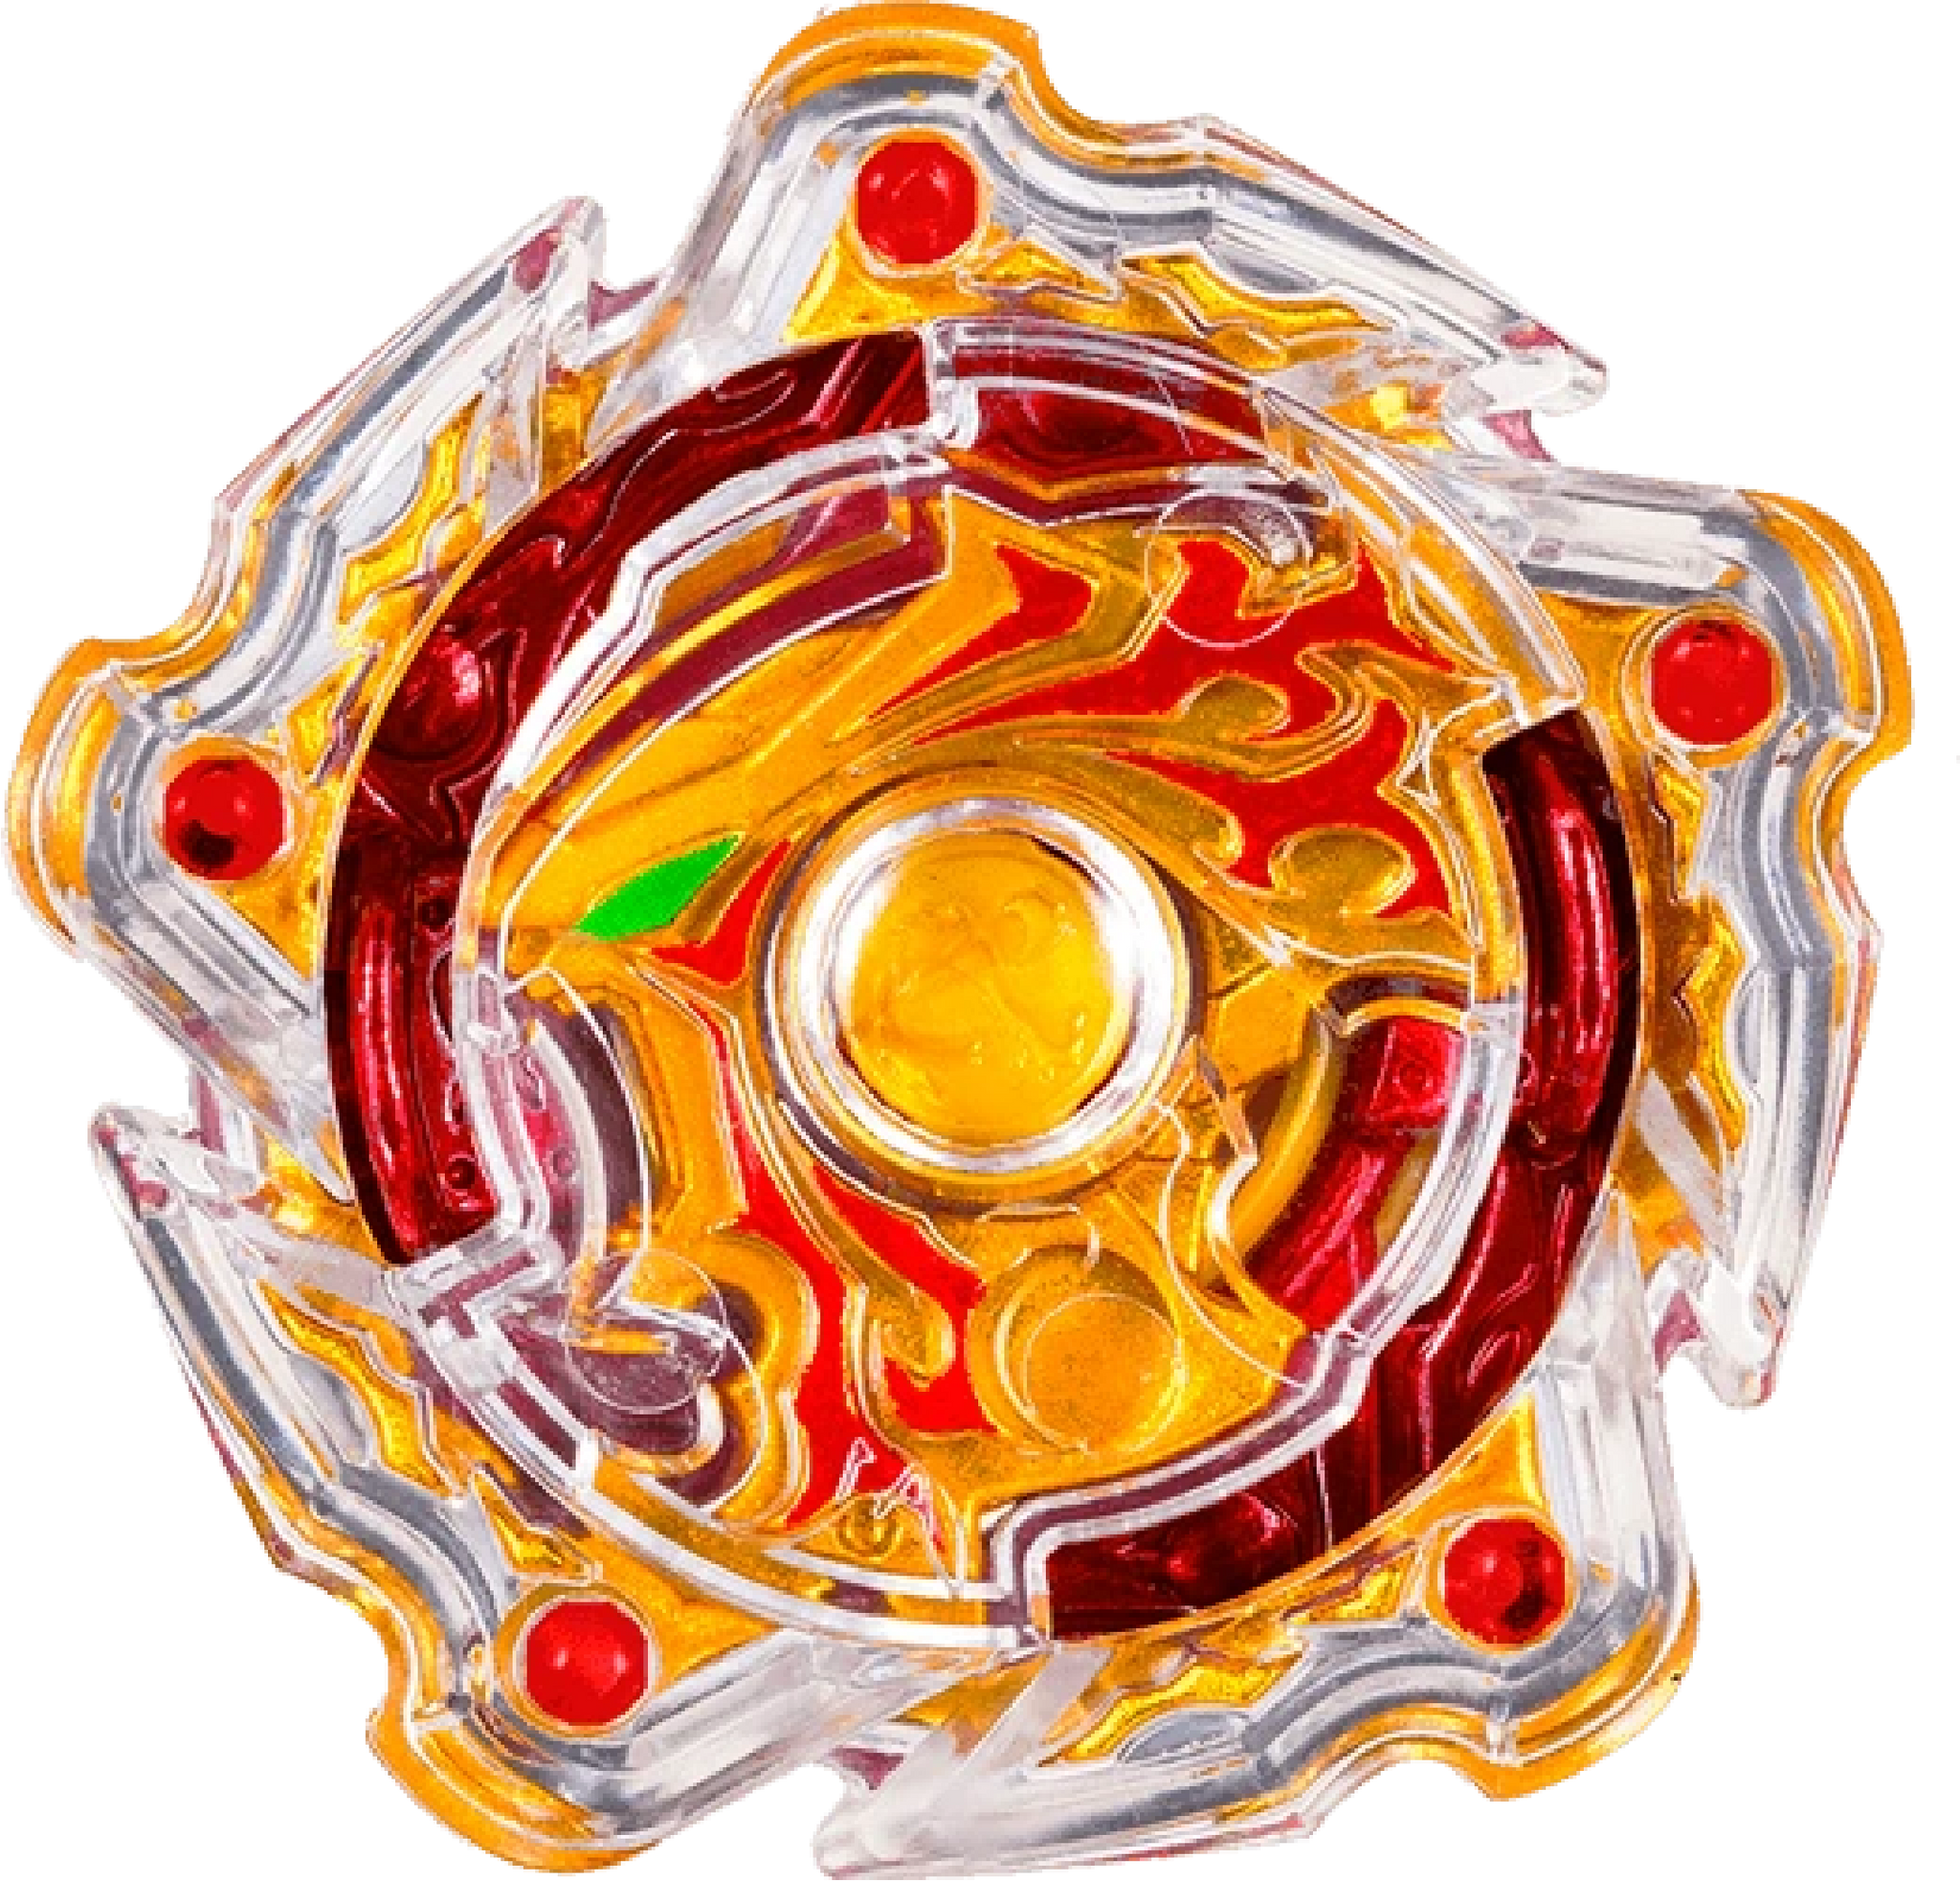 gå på indkøb favor Orient BRAND NEW BEYBLADE BURST RARE GET BEY, SEALED B-00 Amaterios Aero Assa –  Mall of Beys -The Official Store of Beyblade World by Zankye